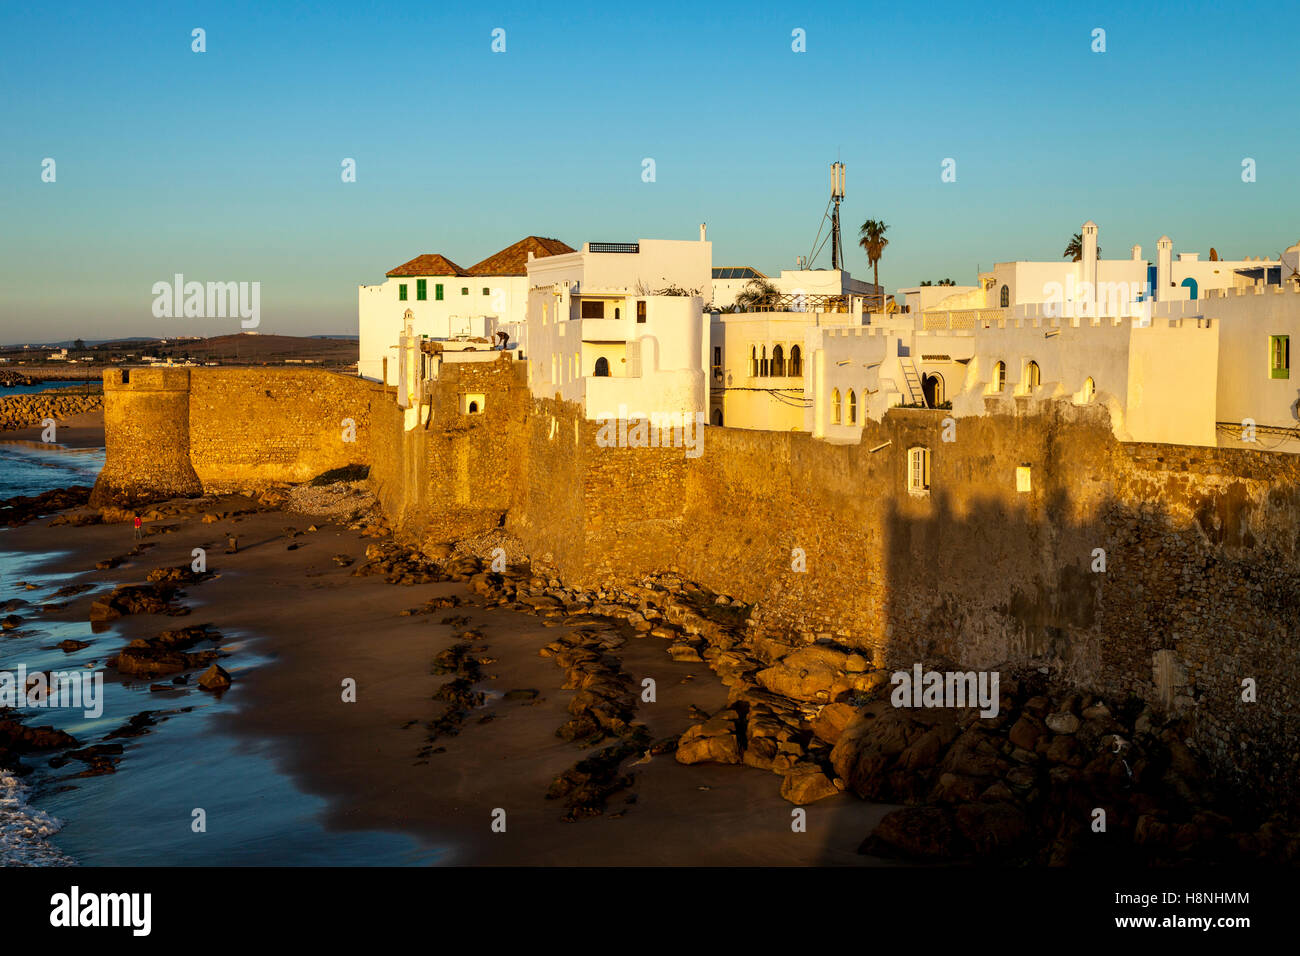 A View Of The Fortress Town Of Asilah, Morocco Stock Photo